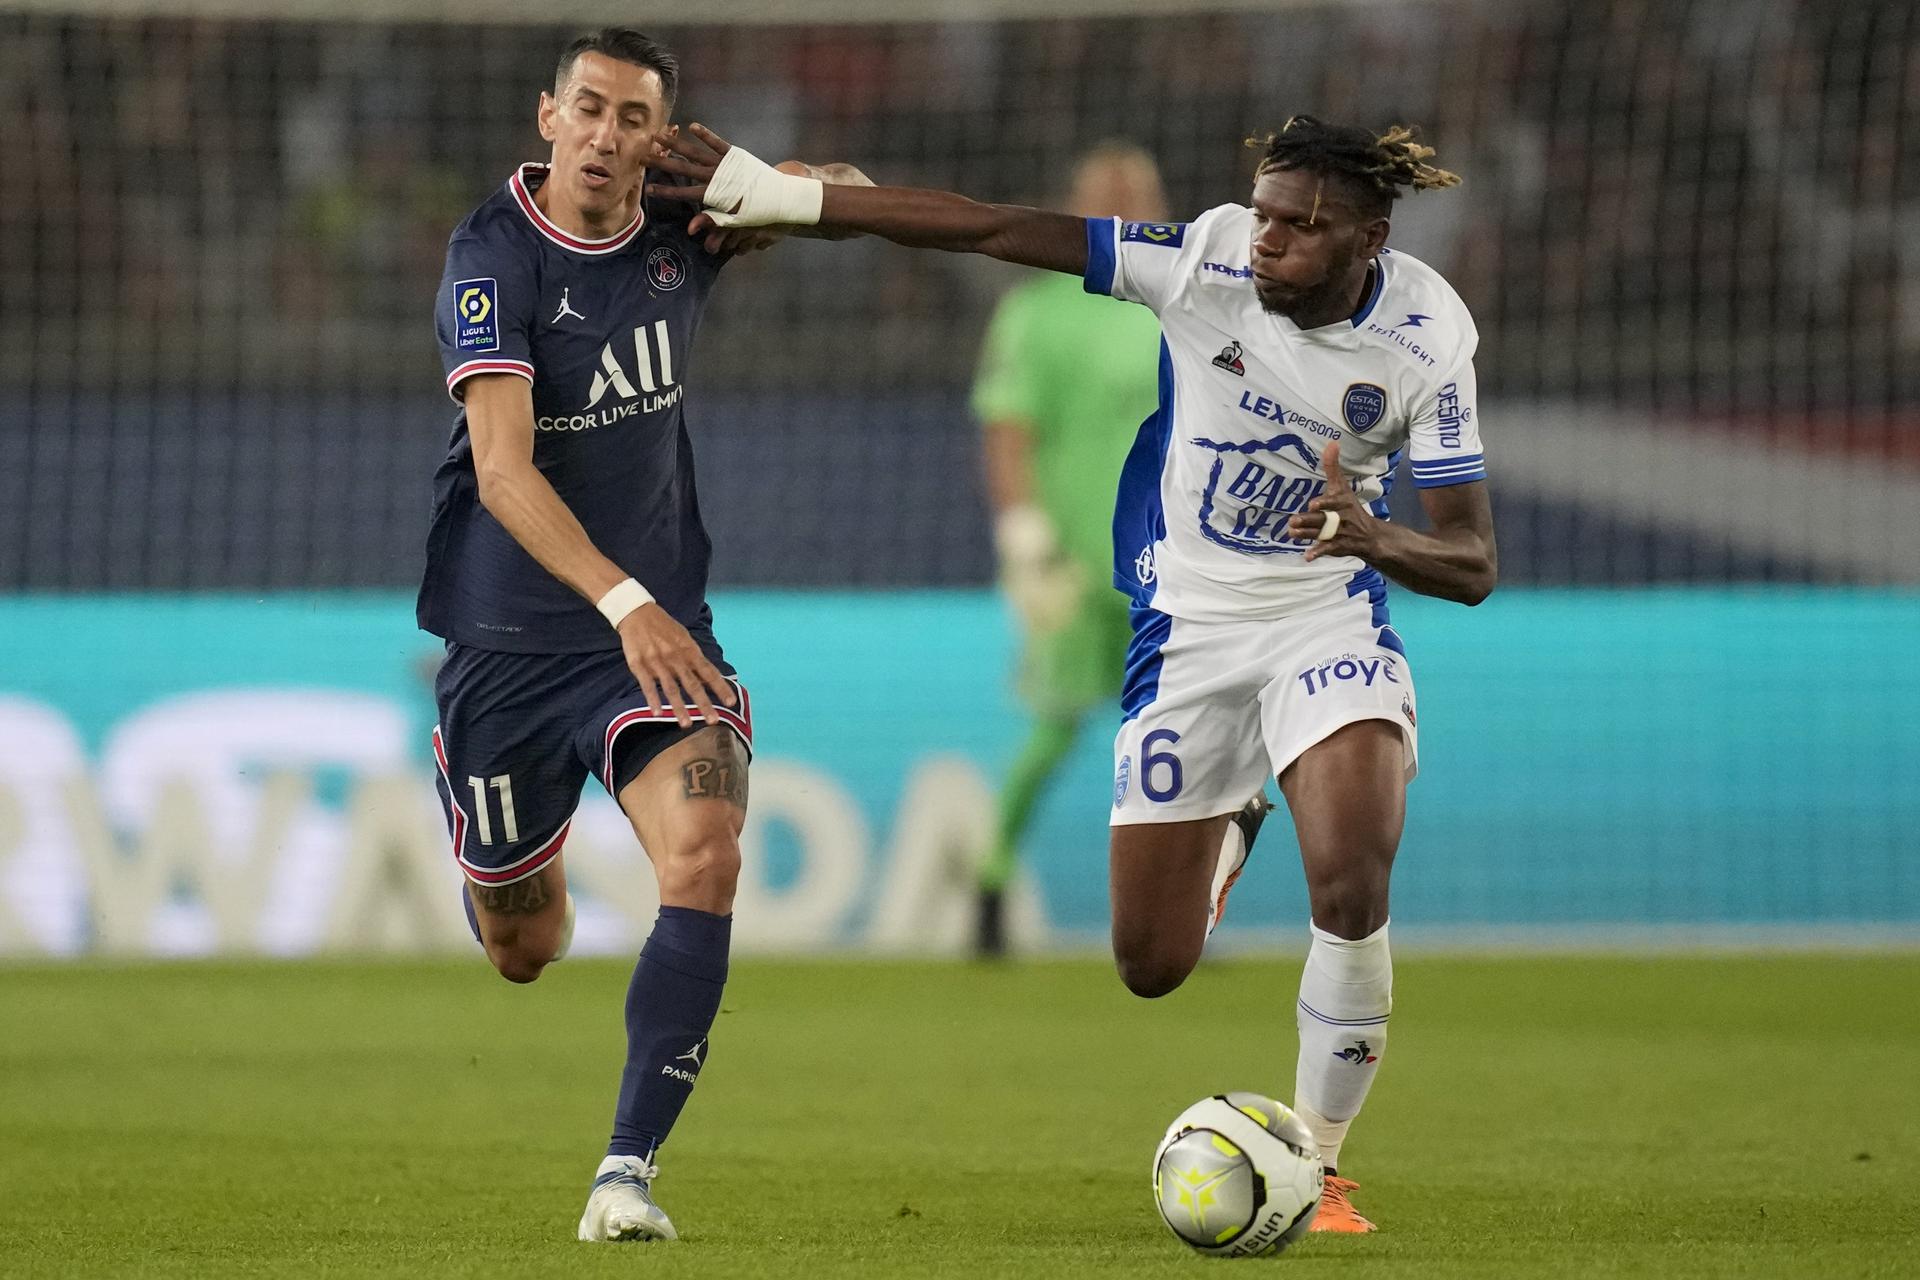 Auxerre vs. Troyes Predictions, Picks and Betting Odds - Friday, November 4, 2022